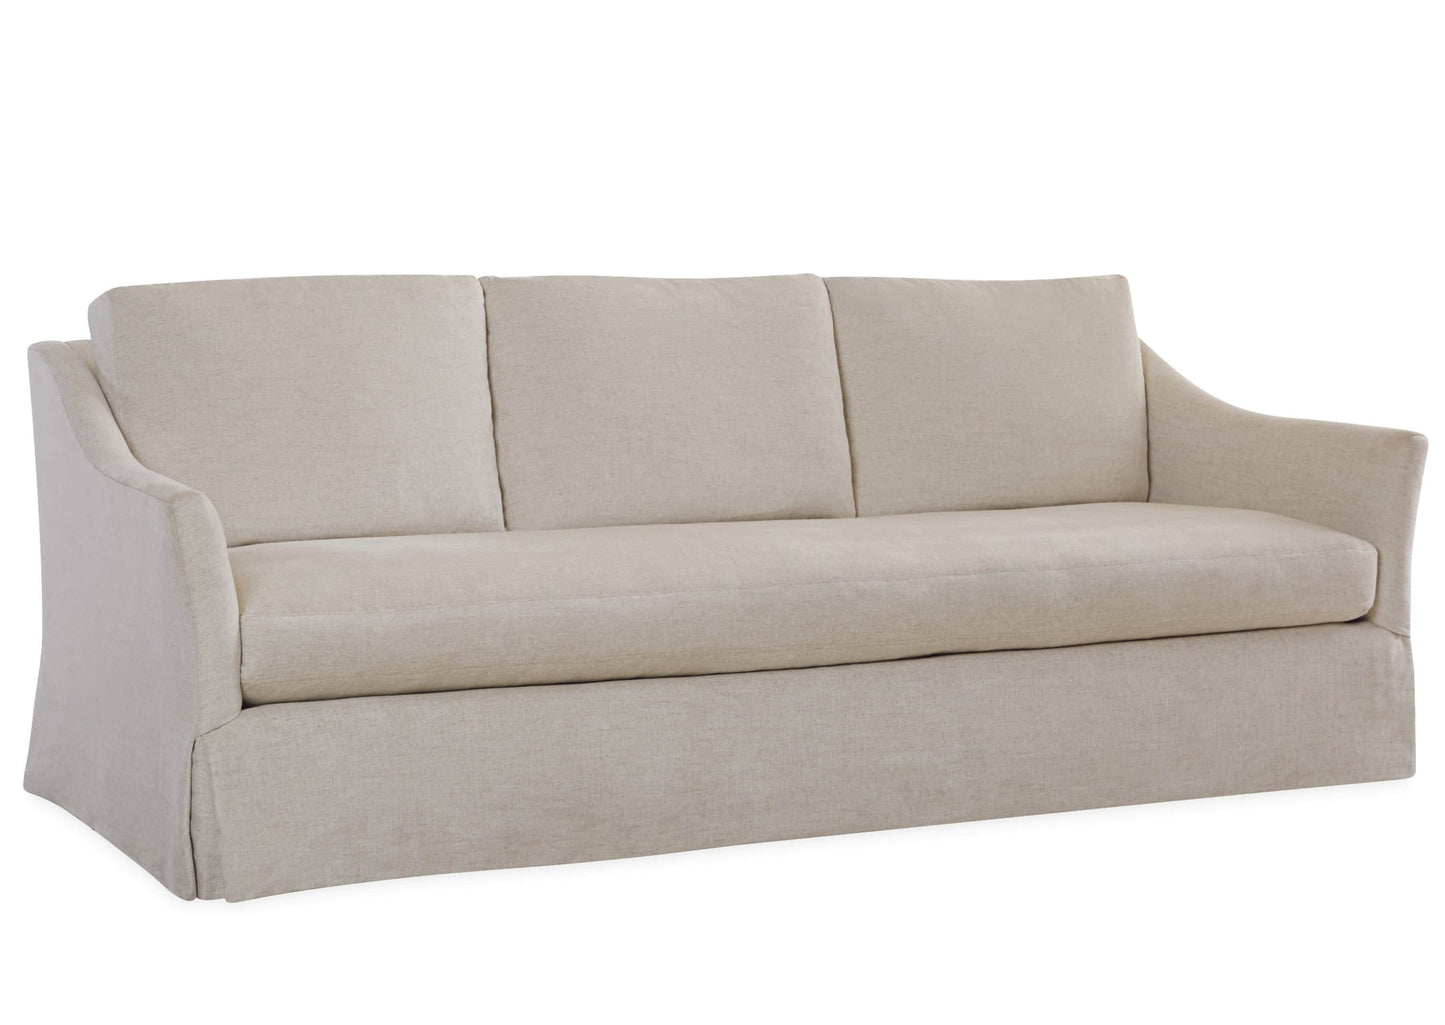 Lee Industries 3511-03 Sofa in a gray fabric with curve arm. 